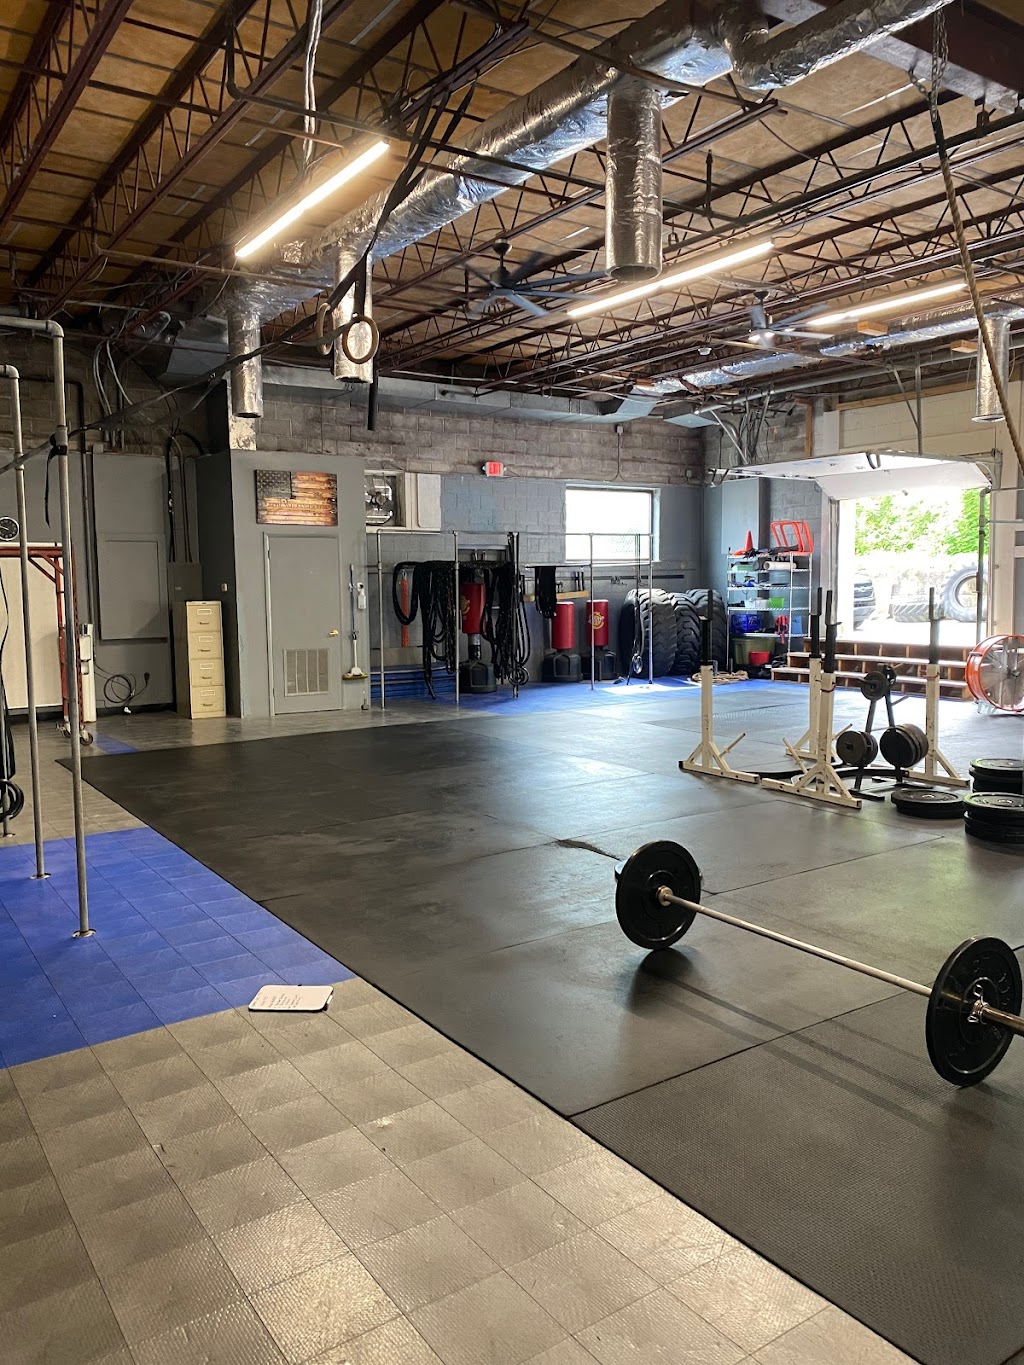 CrossFit Inspire Fitness and Performance | 446 Lancaster Ave, Frazer, PA 19355 | Phone: (484) 566-9342